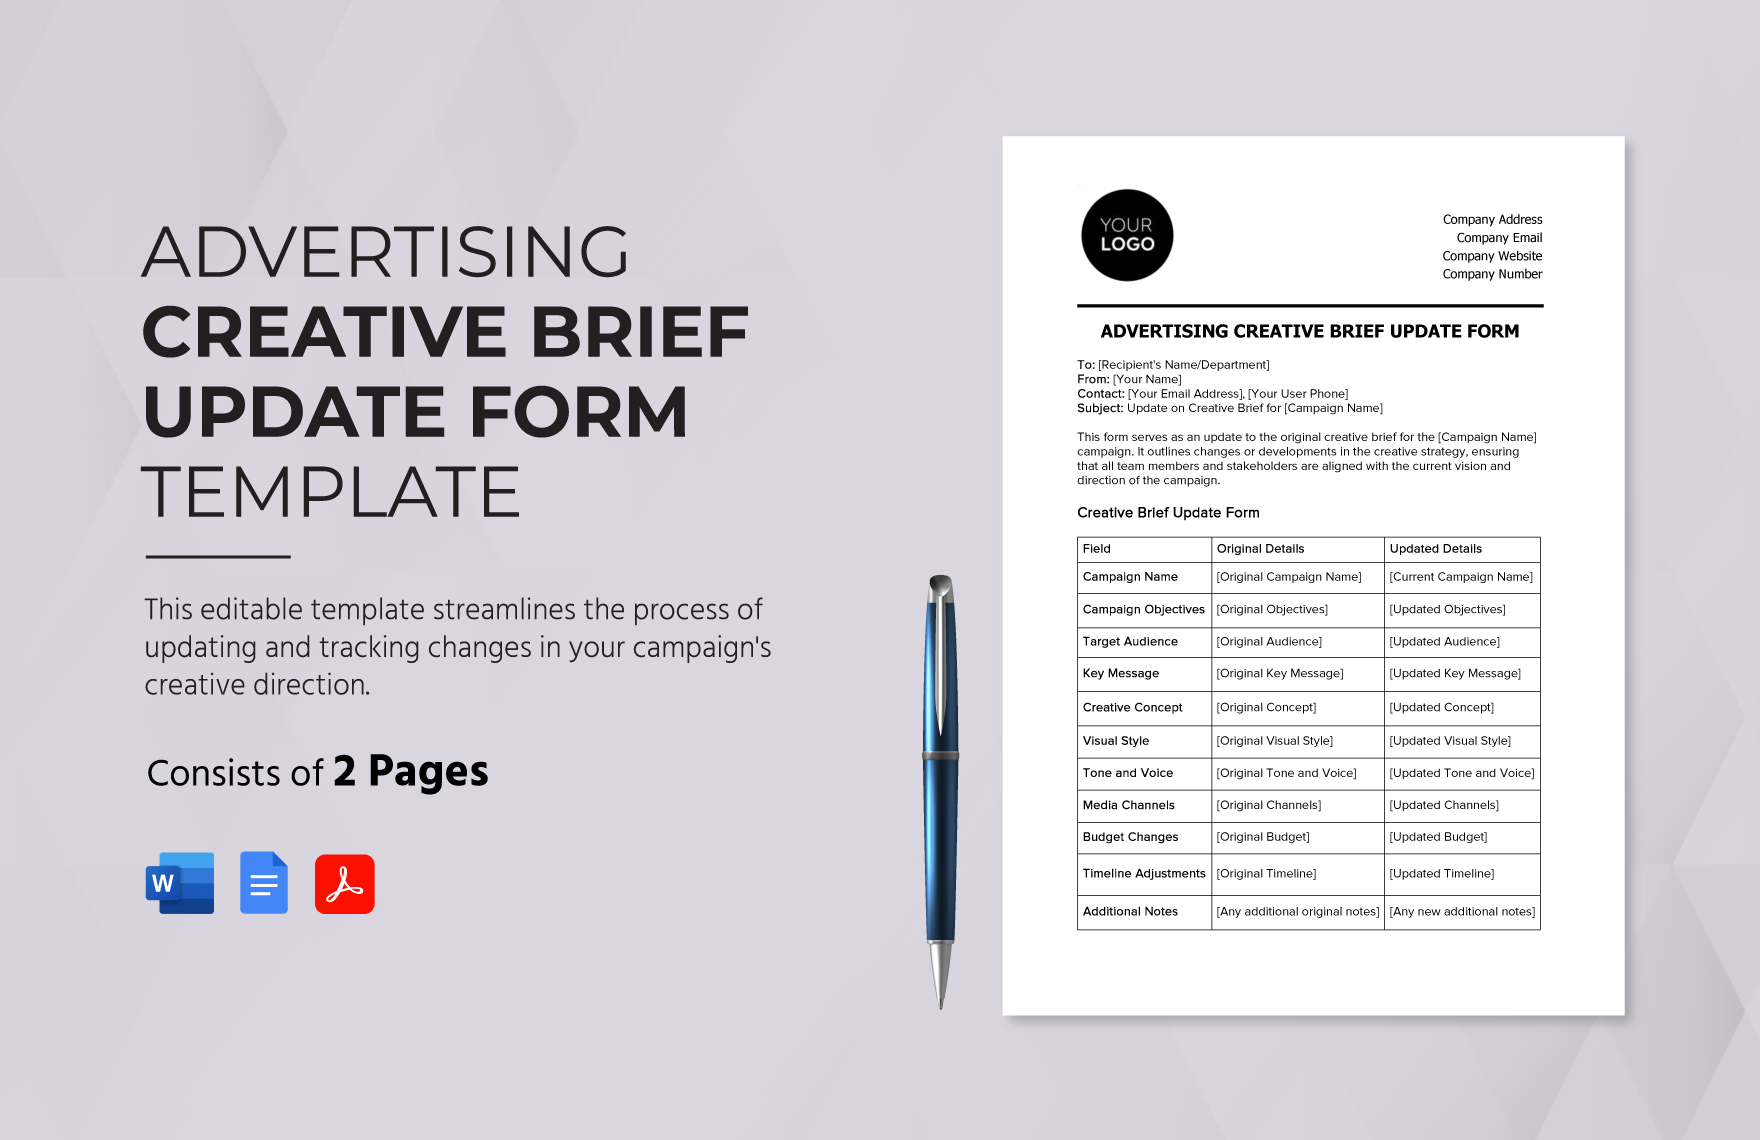 Advertising Creative Brief Update Form Template in Word, Google Docs, PDF